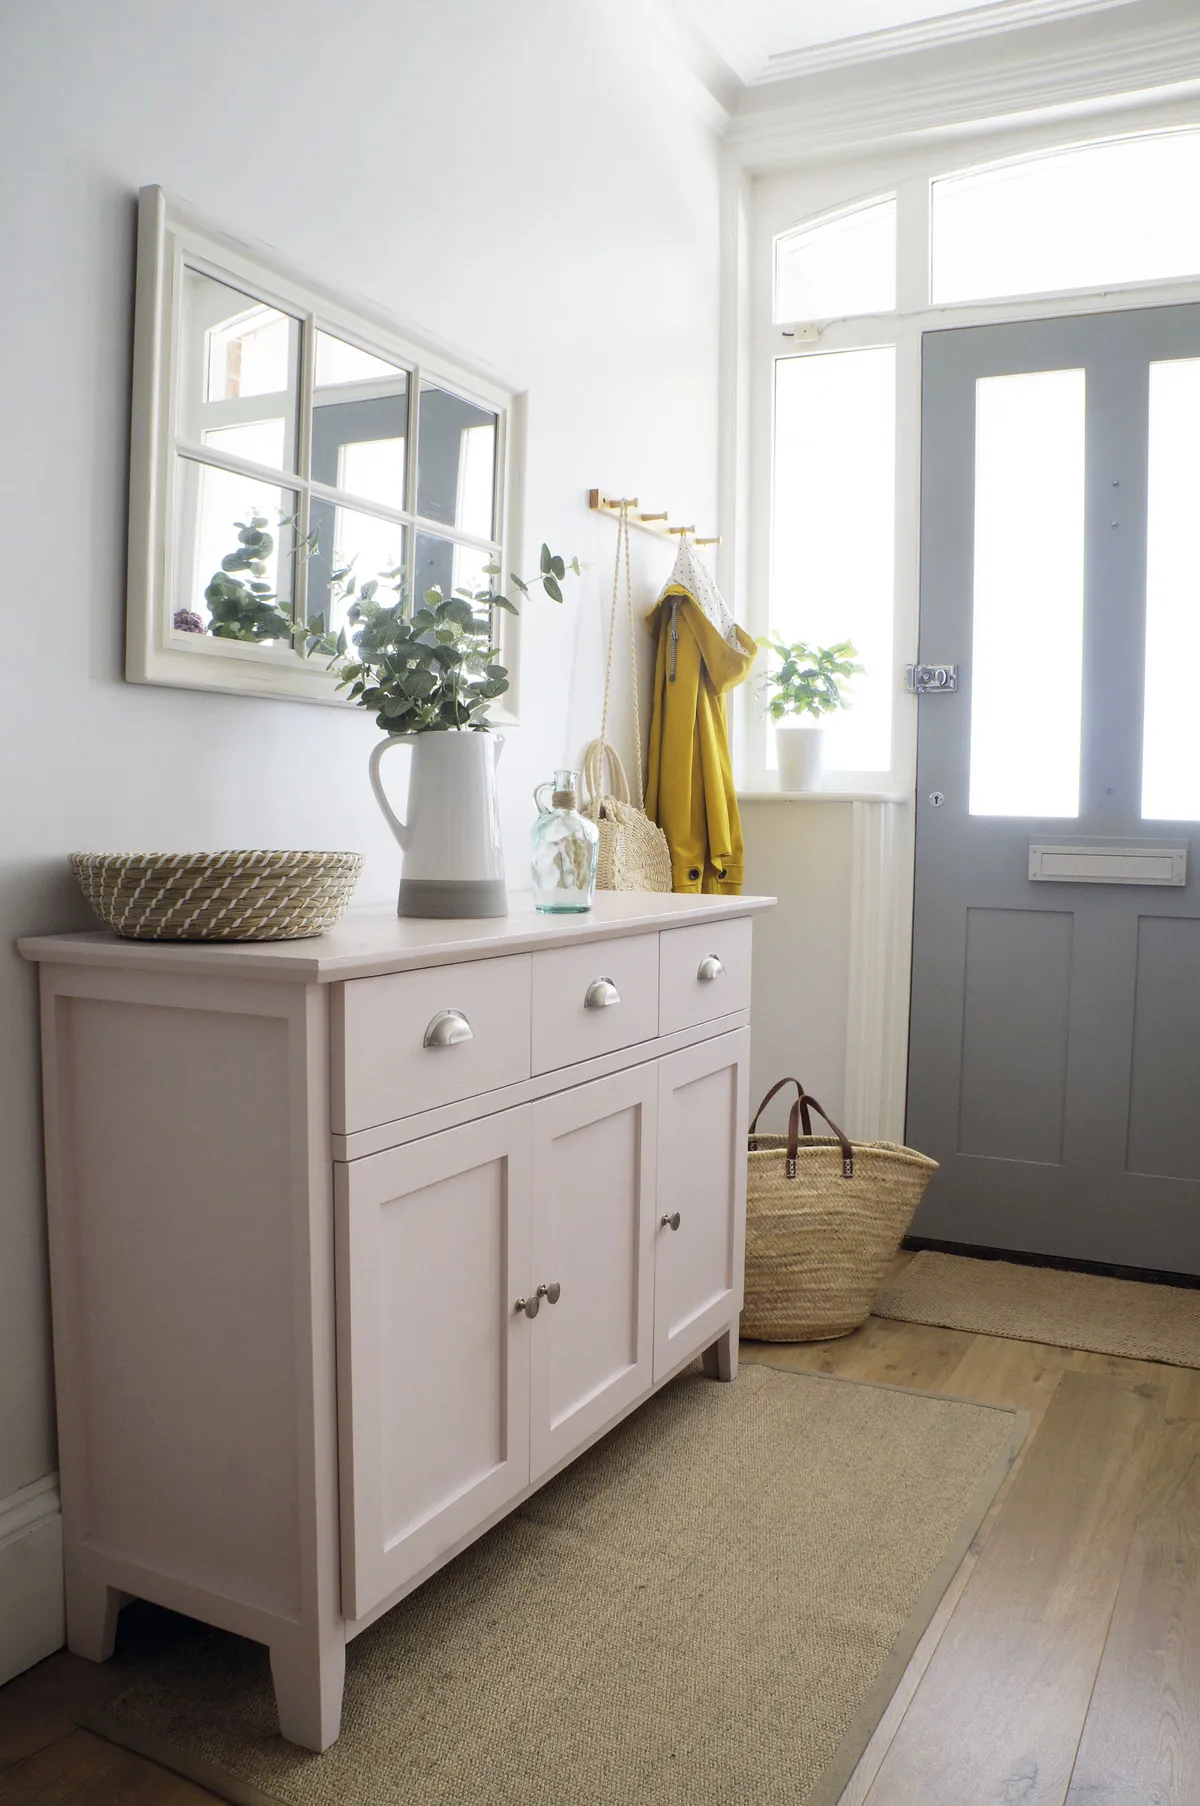 ‘The staircase and large hallway are what sold the house to me, so I wanted to keep them light and bright to emphasise the space,’ says Jade. ‘The pink sideboard is one of my favourite pieces of furniture. It cost £30 on Gumtree and then I upcycled it.’